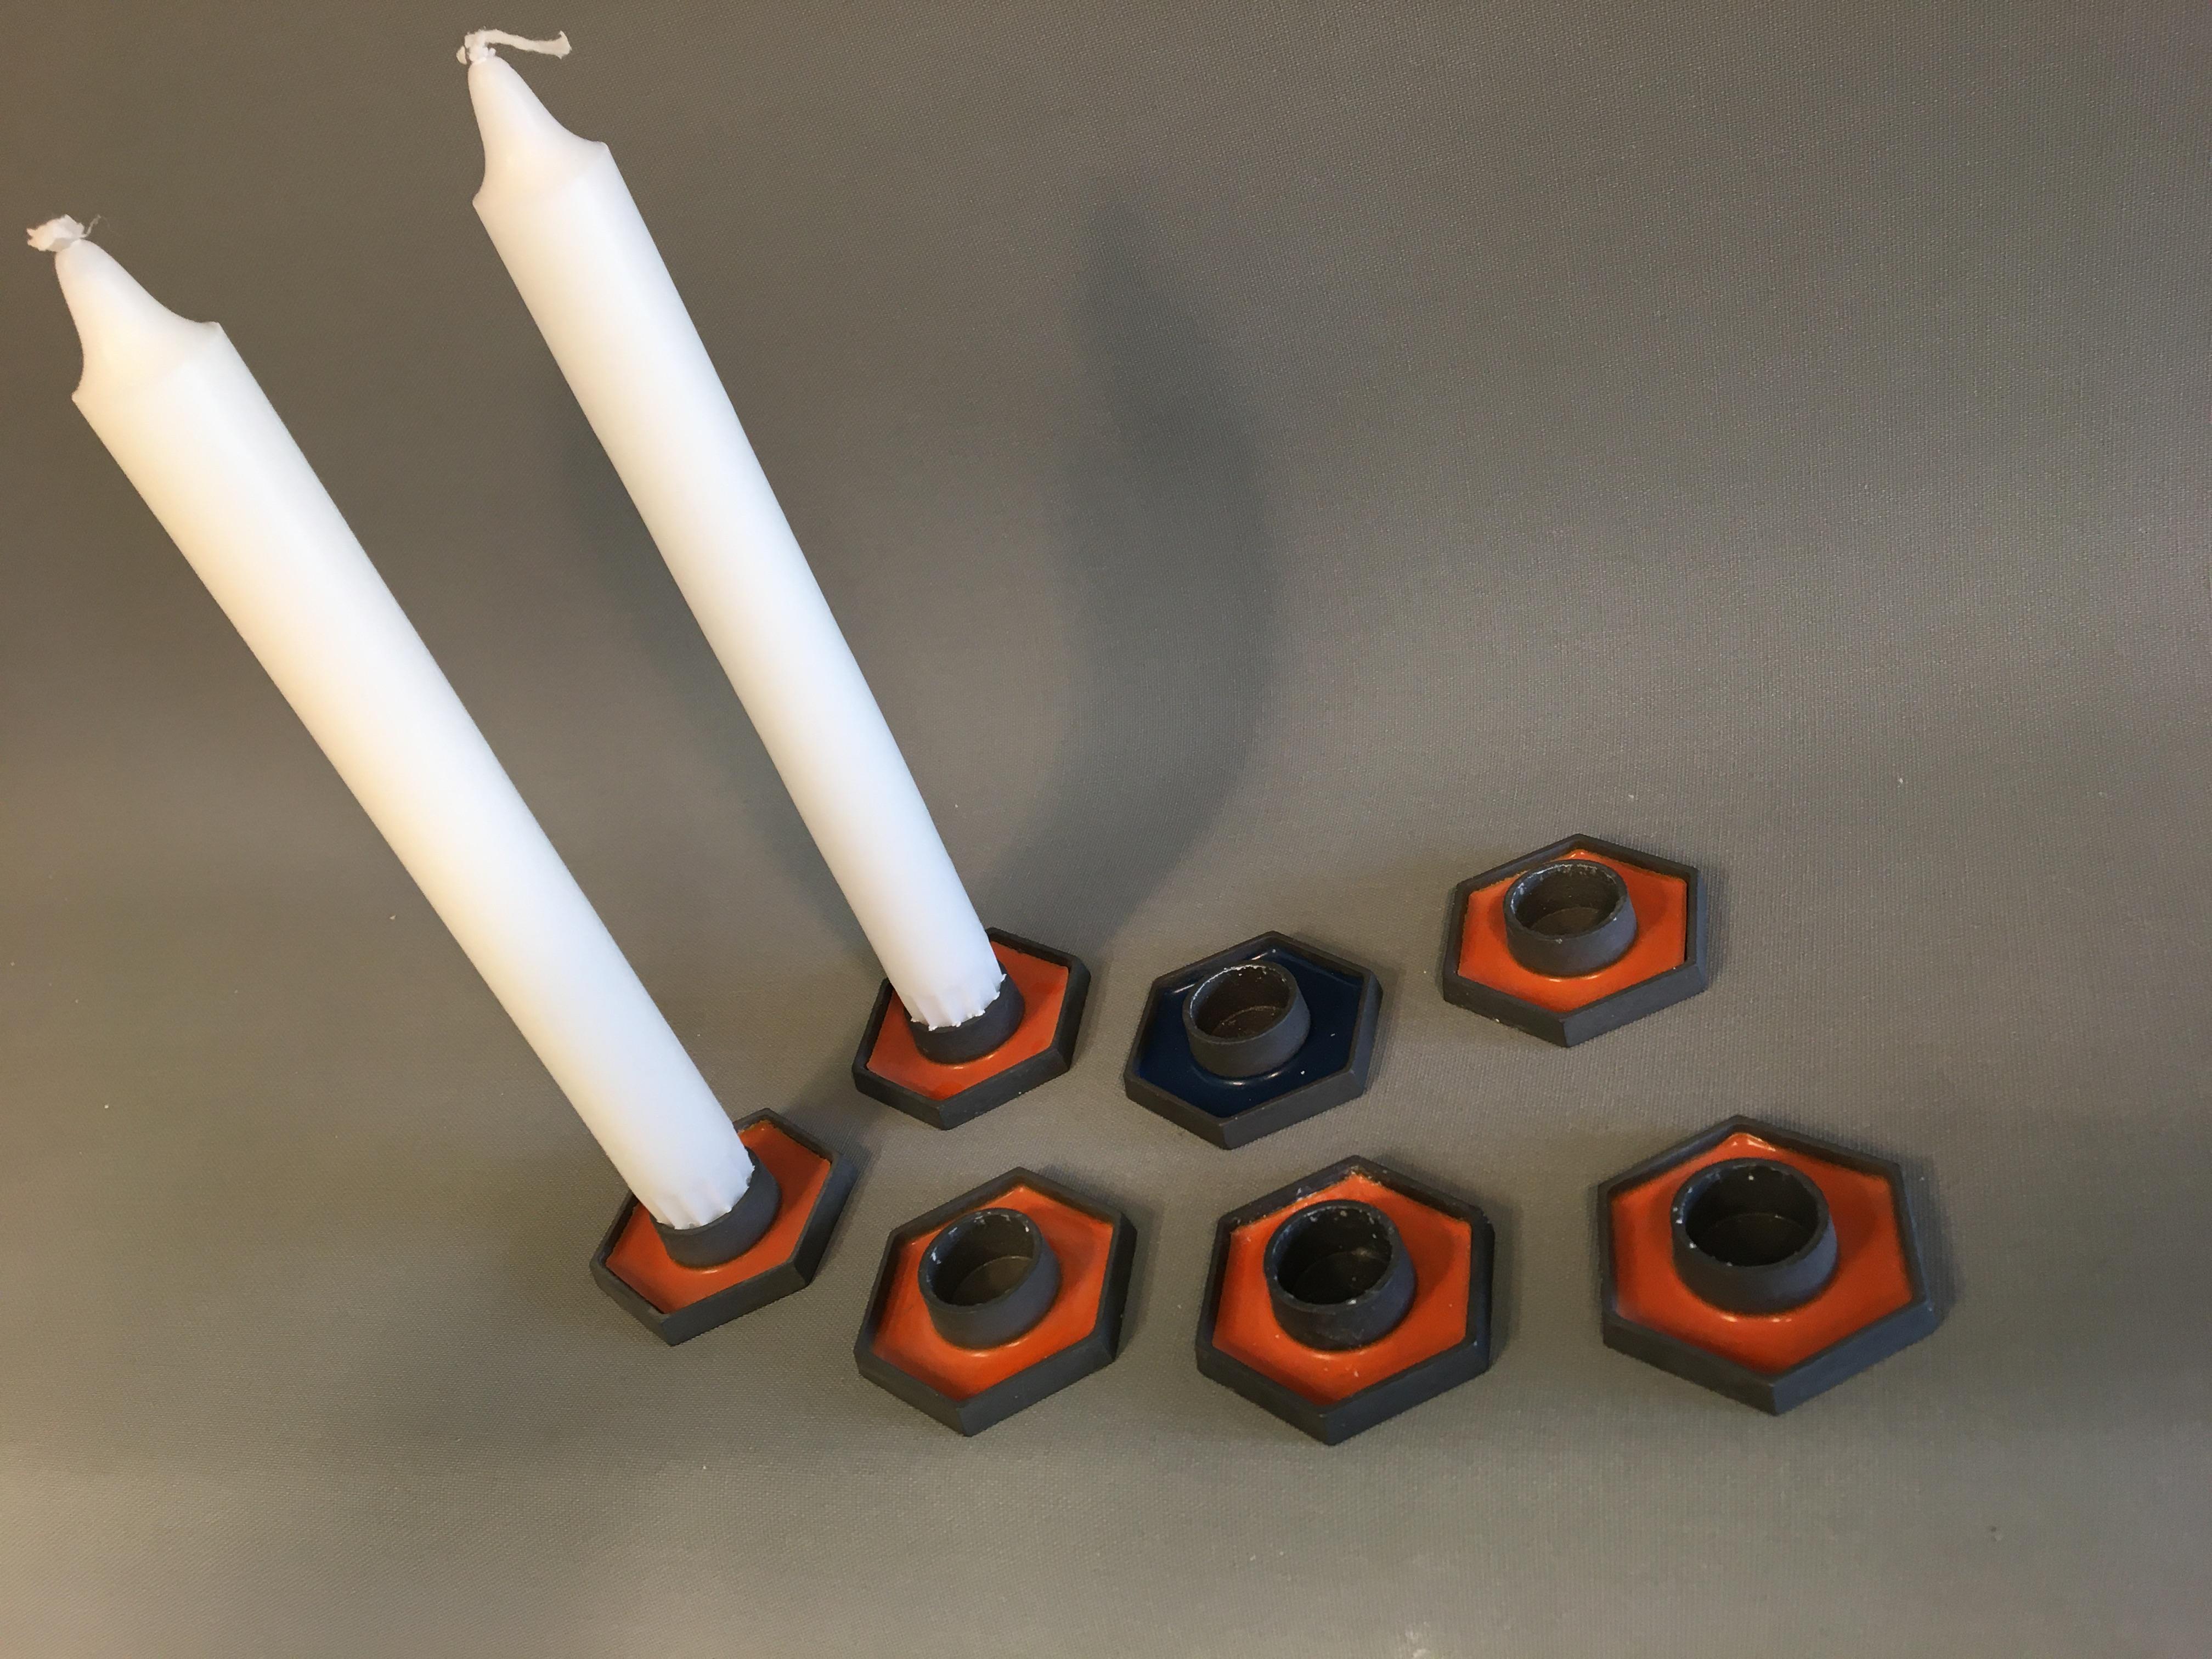 Candle holder Danish Design. Made in Denmark. 'Mønster beskyttet Paro'
Hexagonal candlesticks in orange, and a single blue to ordinary size candle.
The candlesticks are in iron with orange glaze.
Marked at the bottom with 'Design Made in Denmark'